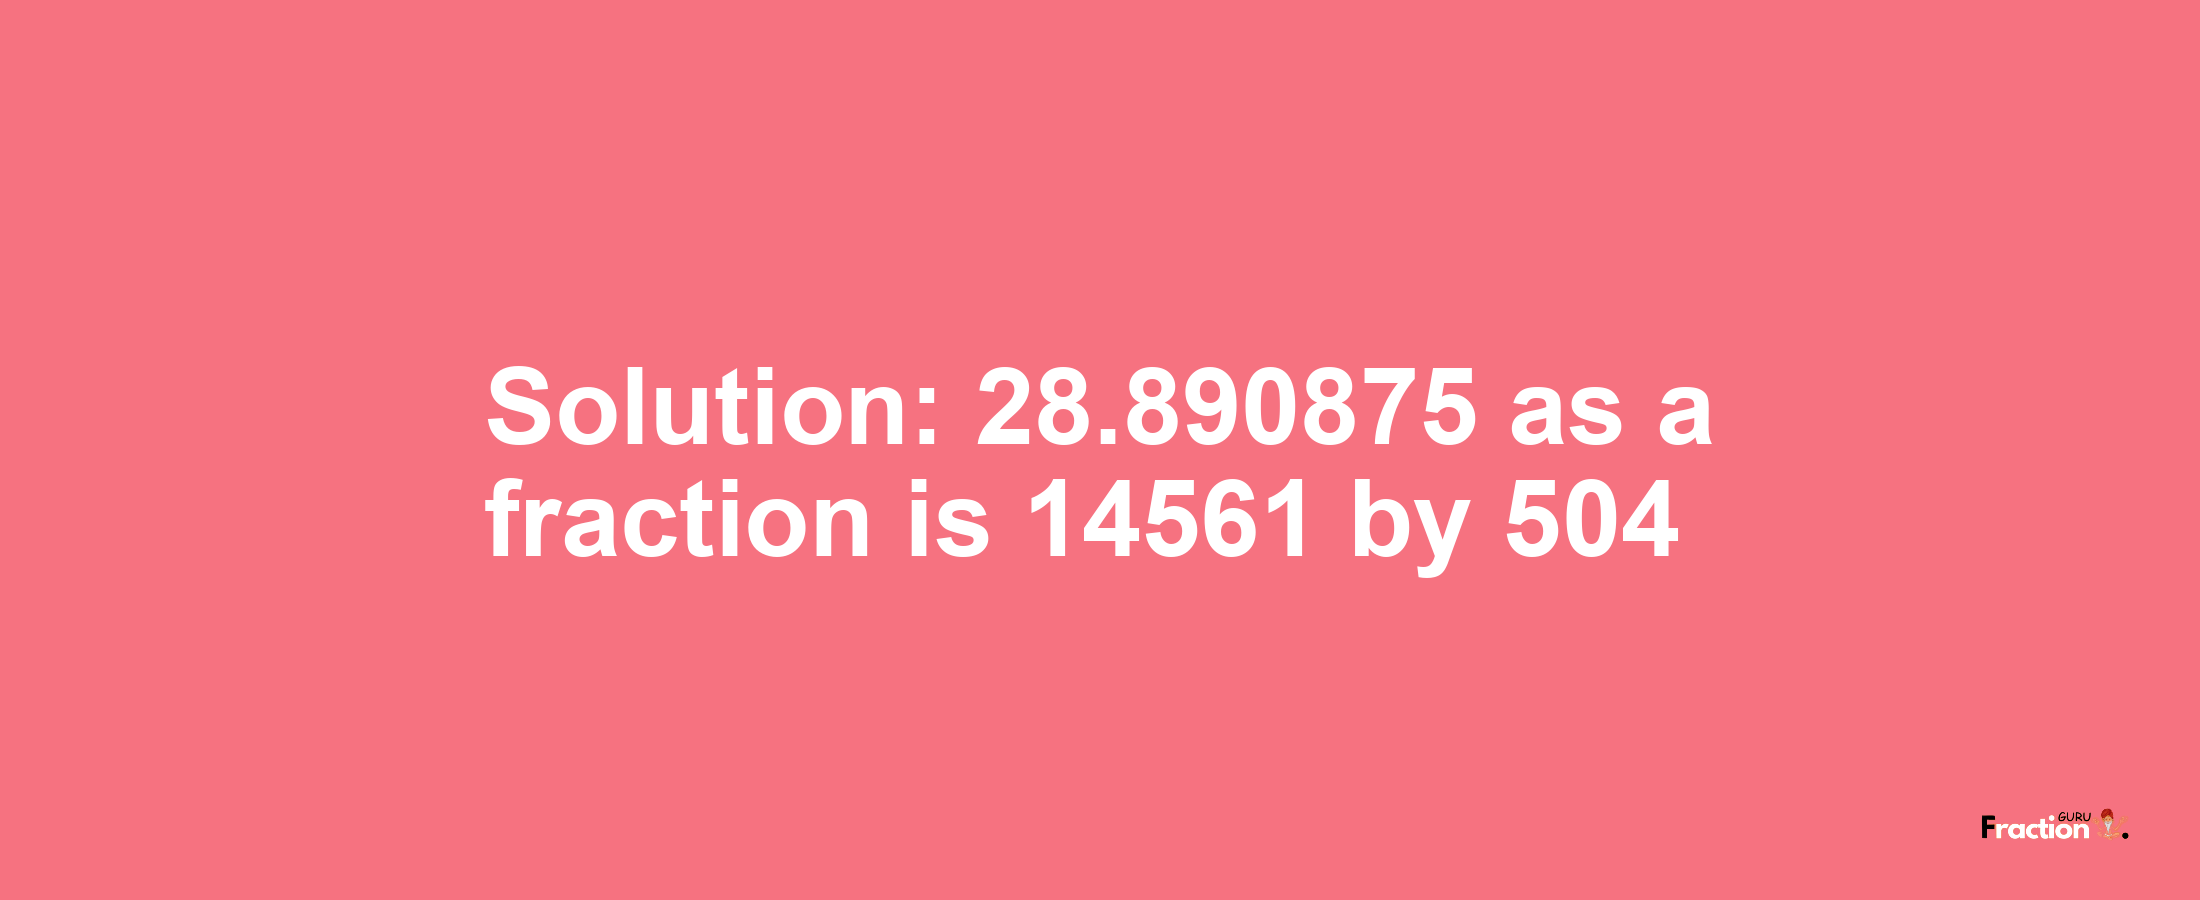 Solution:28.890875 as a fraction is 14561/504